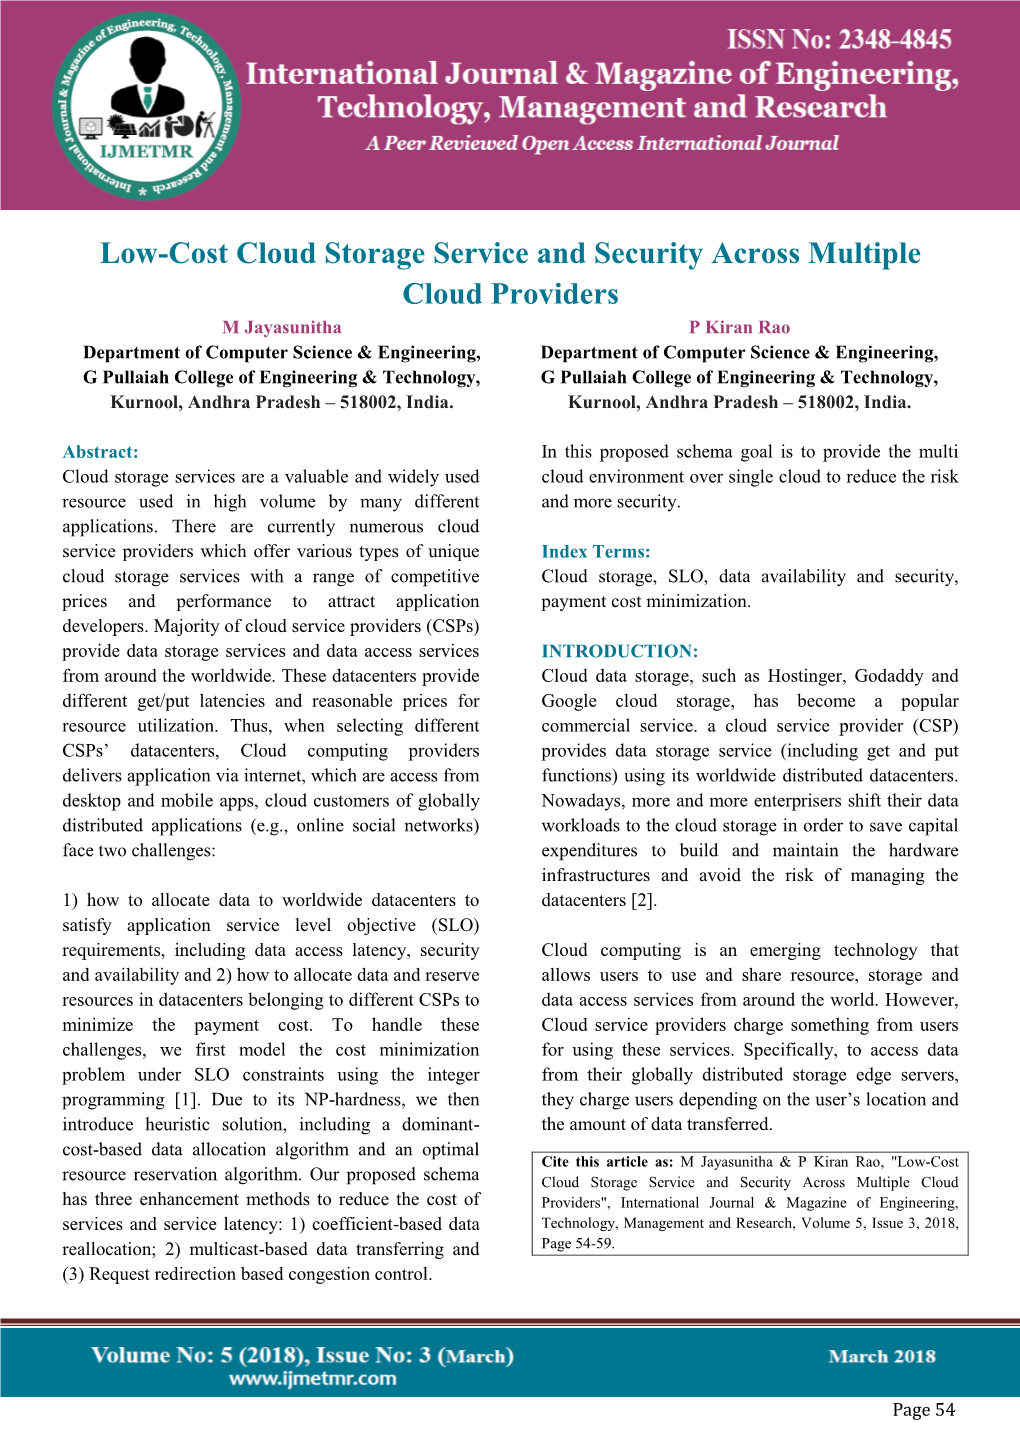 Low-Cost Cloud Storage Service and Security Across Multiple